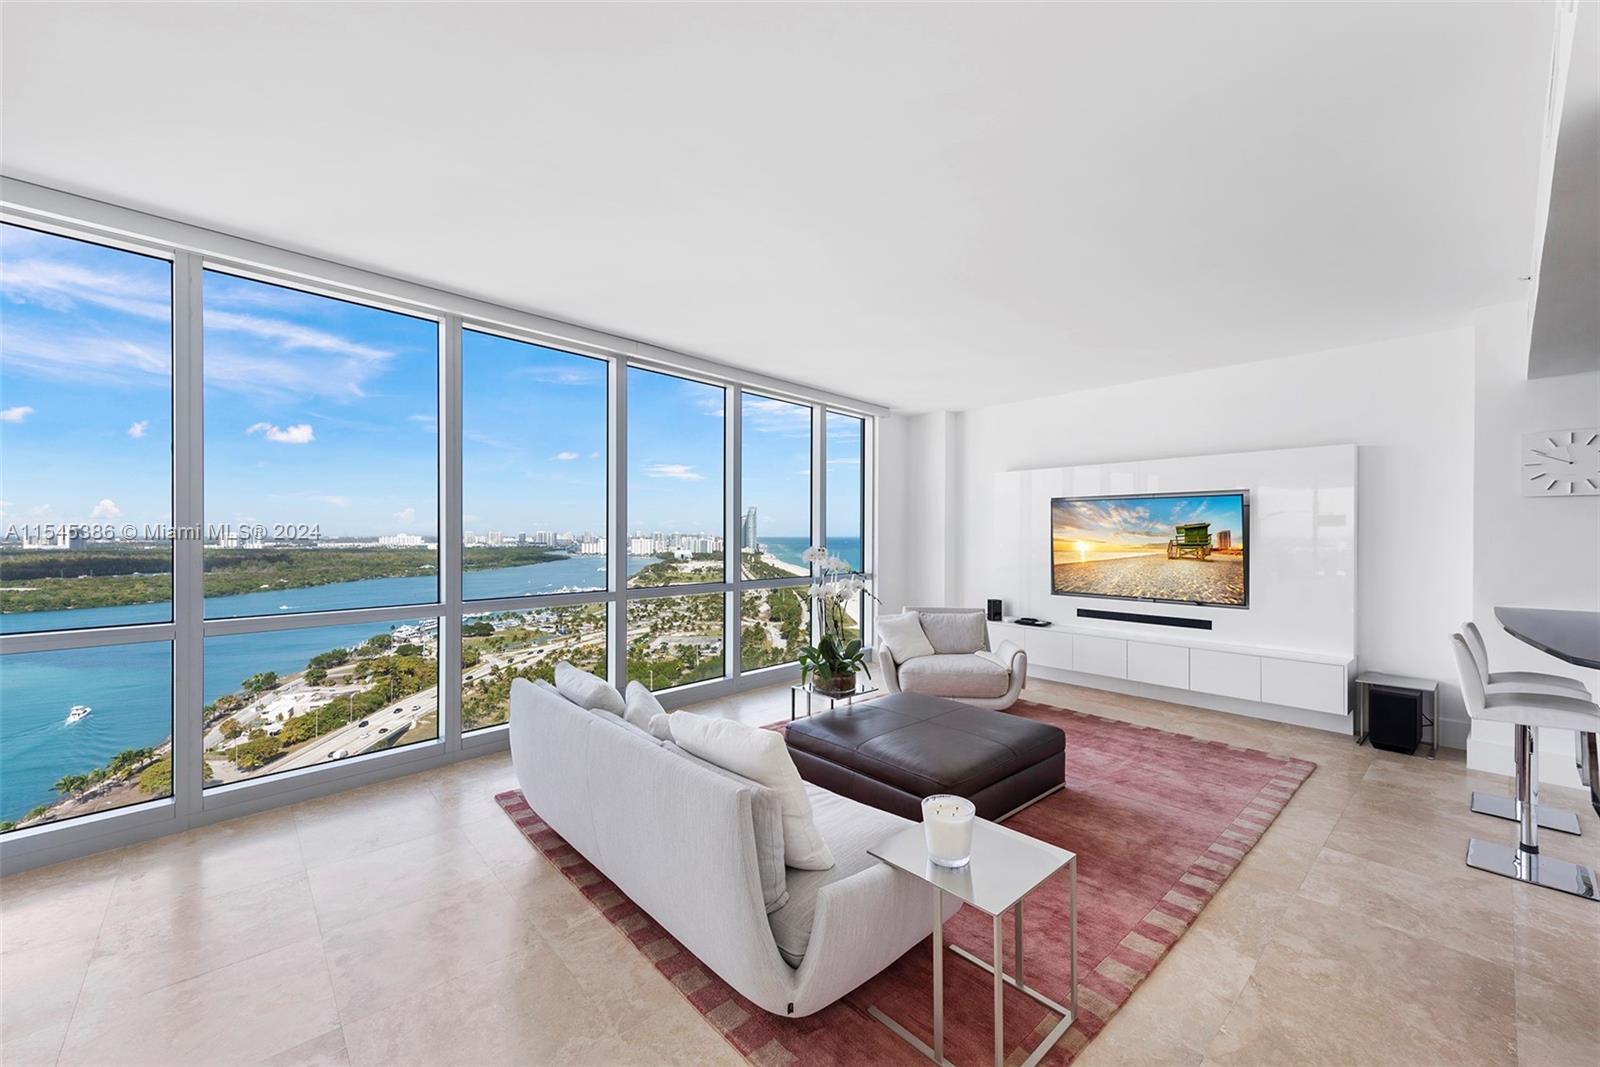 Stunning high-floor corner residence with private elevator and floor-to-ceiling windows. Enjoy breathtaking
unobstructed views of the intracoastal inlet, the ocean coastline, and the Miami skyline from an impressive terrace.
Residence 2404, located one floor below the penthouses, features a state-of-the-art kitchen with Poggenpohl
cabinetry, fully-appointed bathrooms featuring the finest fixtures. Residents enjoy full access to Ritz Carlton resort
amenities such as ocean and poolside service and an on-site restaurant and spa. Located minutes from Miami
Beach’s finest shopping and dining destinations.